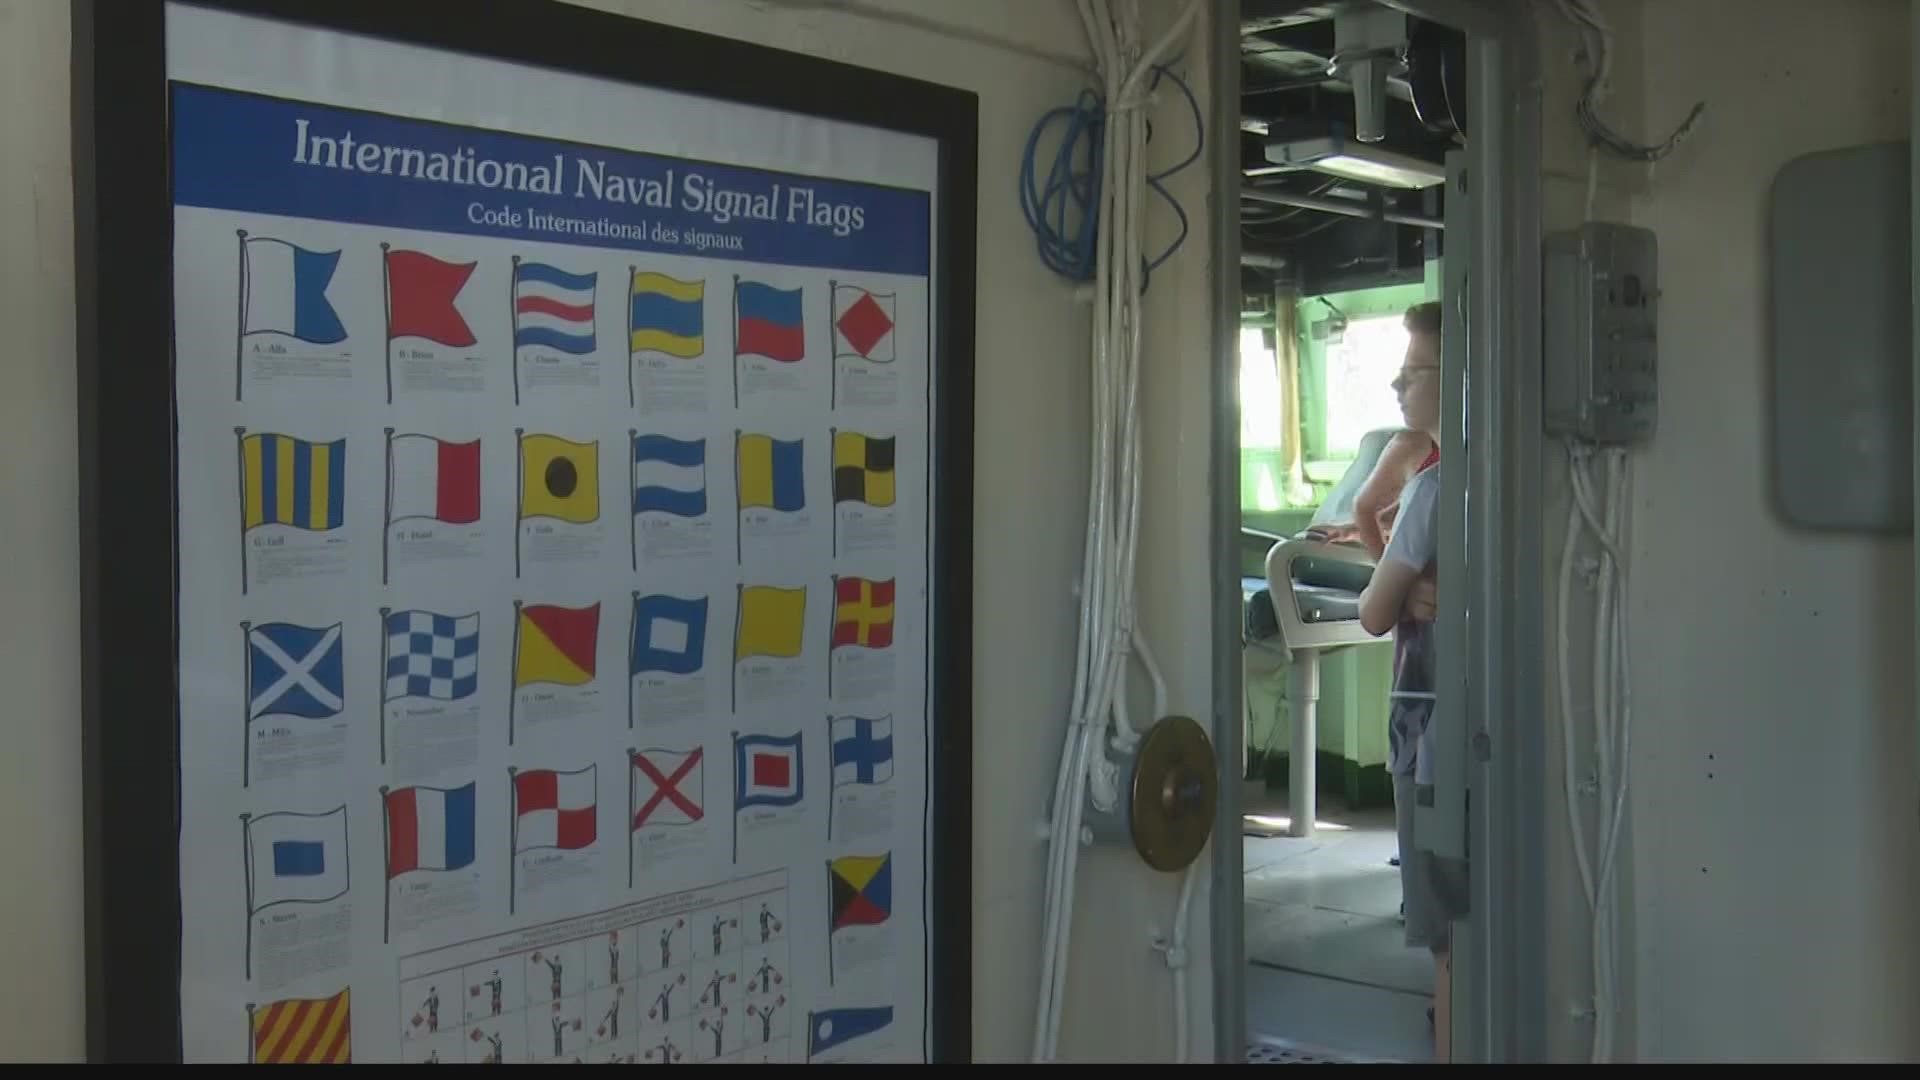 The USS Orleck is open for tours for the ship's first Fourth of July on the East Coast.